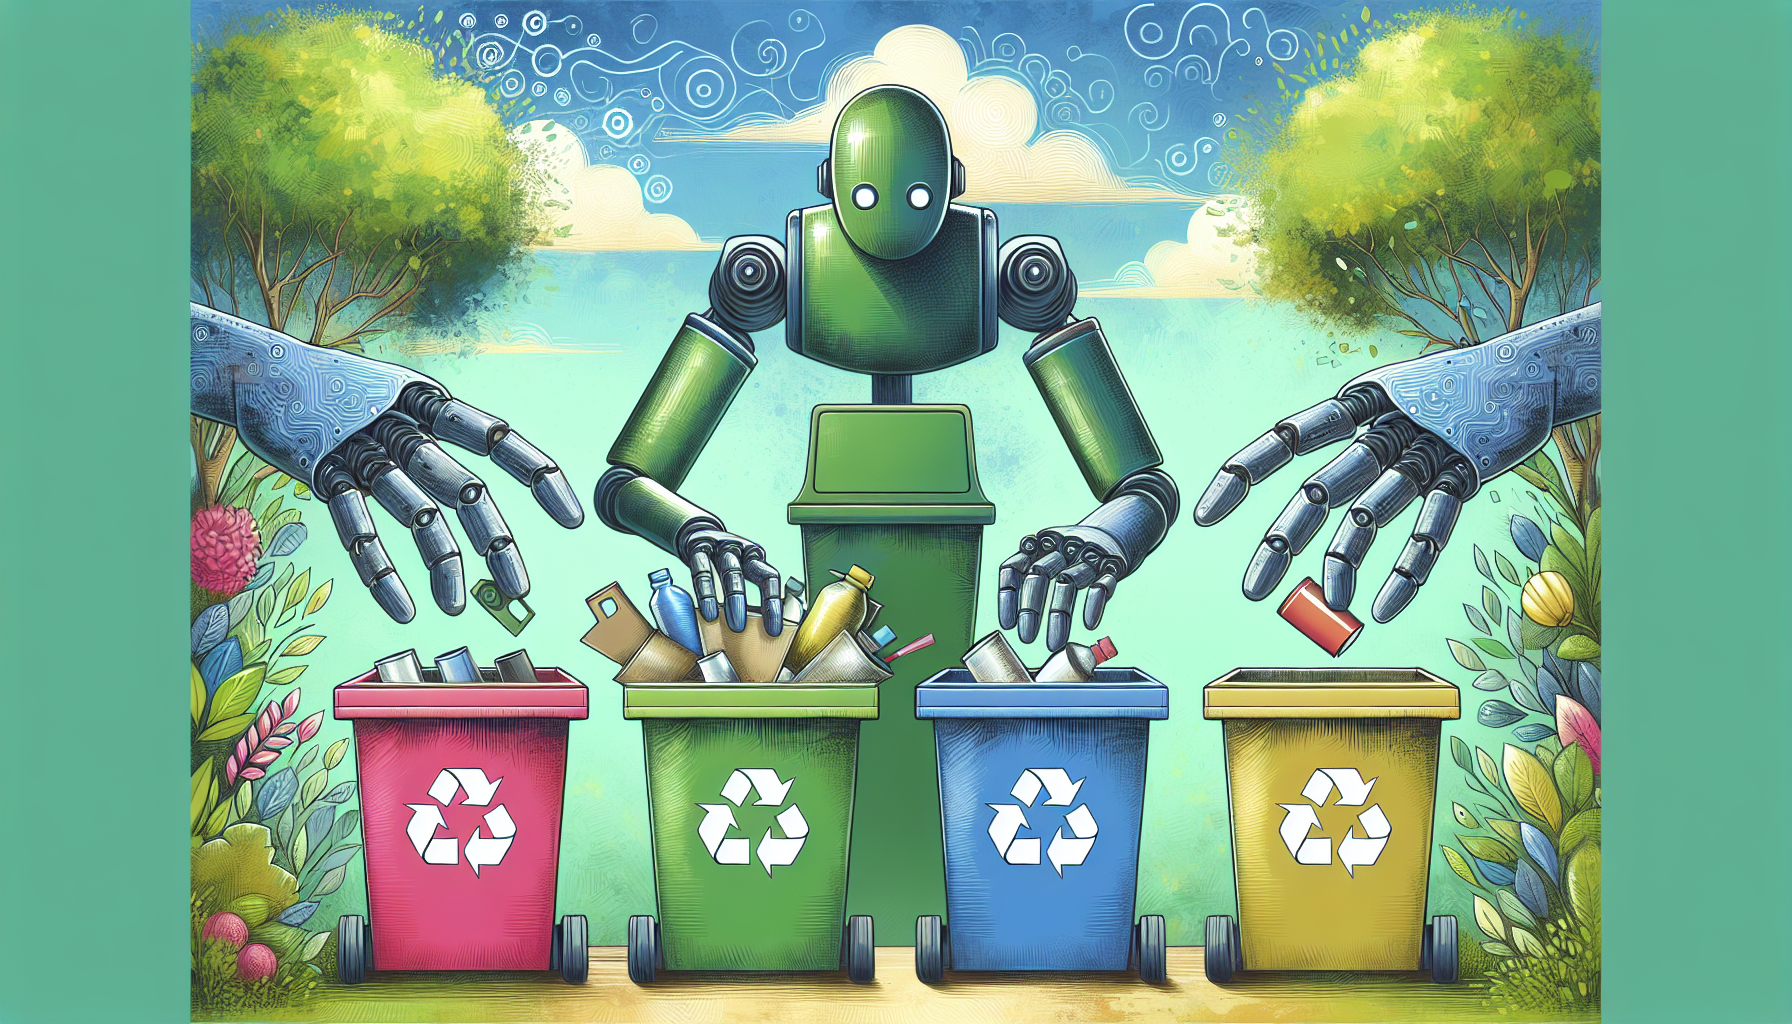 Environmental responsibility and recycling initiatives